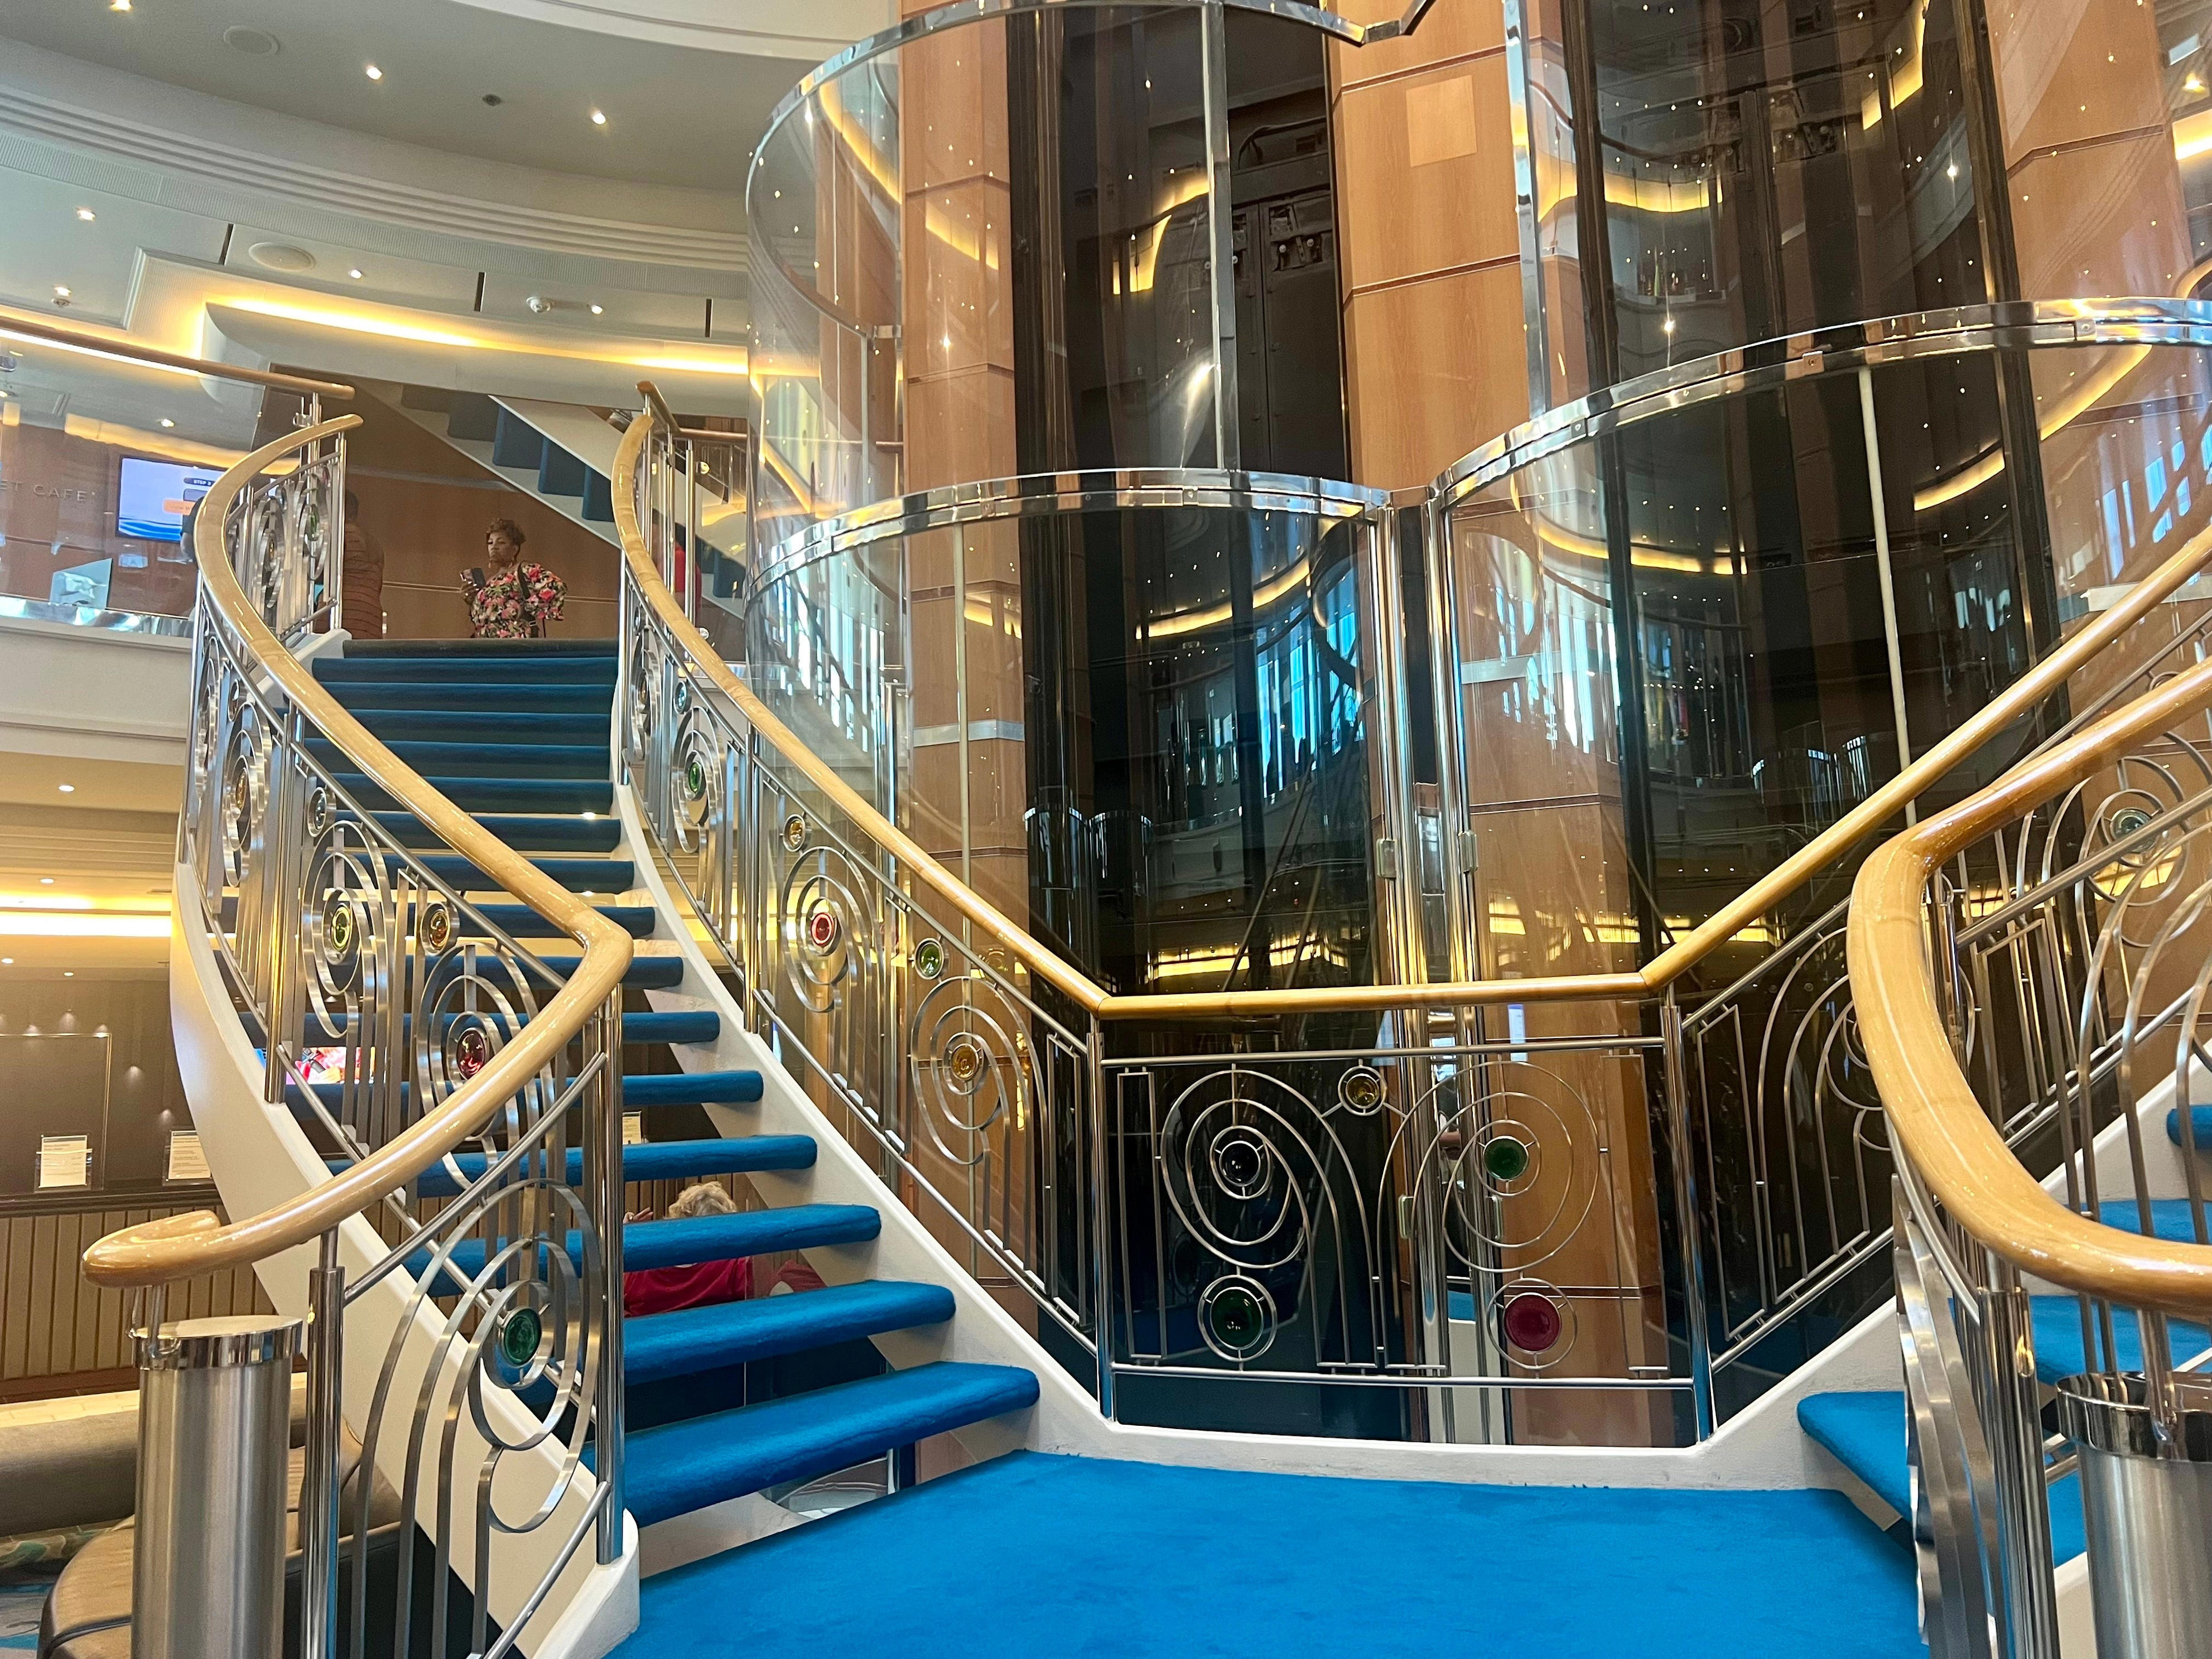 <p>Business Insider's Brittany Chang sailed on the <a href="https://www.businessinsider.com/photos-norwegian-cruise-line-new-1-billion-prima-cruise-ship-2022-10">billion-dollar Norwegian Prima</a> in 2022 with 18 decks, a 10-story slide, and a three-level go-kart track.</p><p>These amenities take cruising to the next level, and experiencing a longer sailing on an even bigger ship is next on my bucket list.</p>